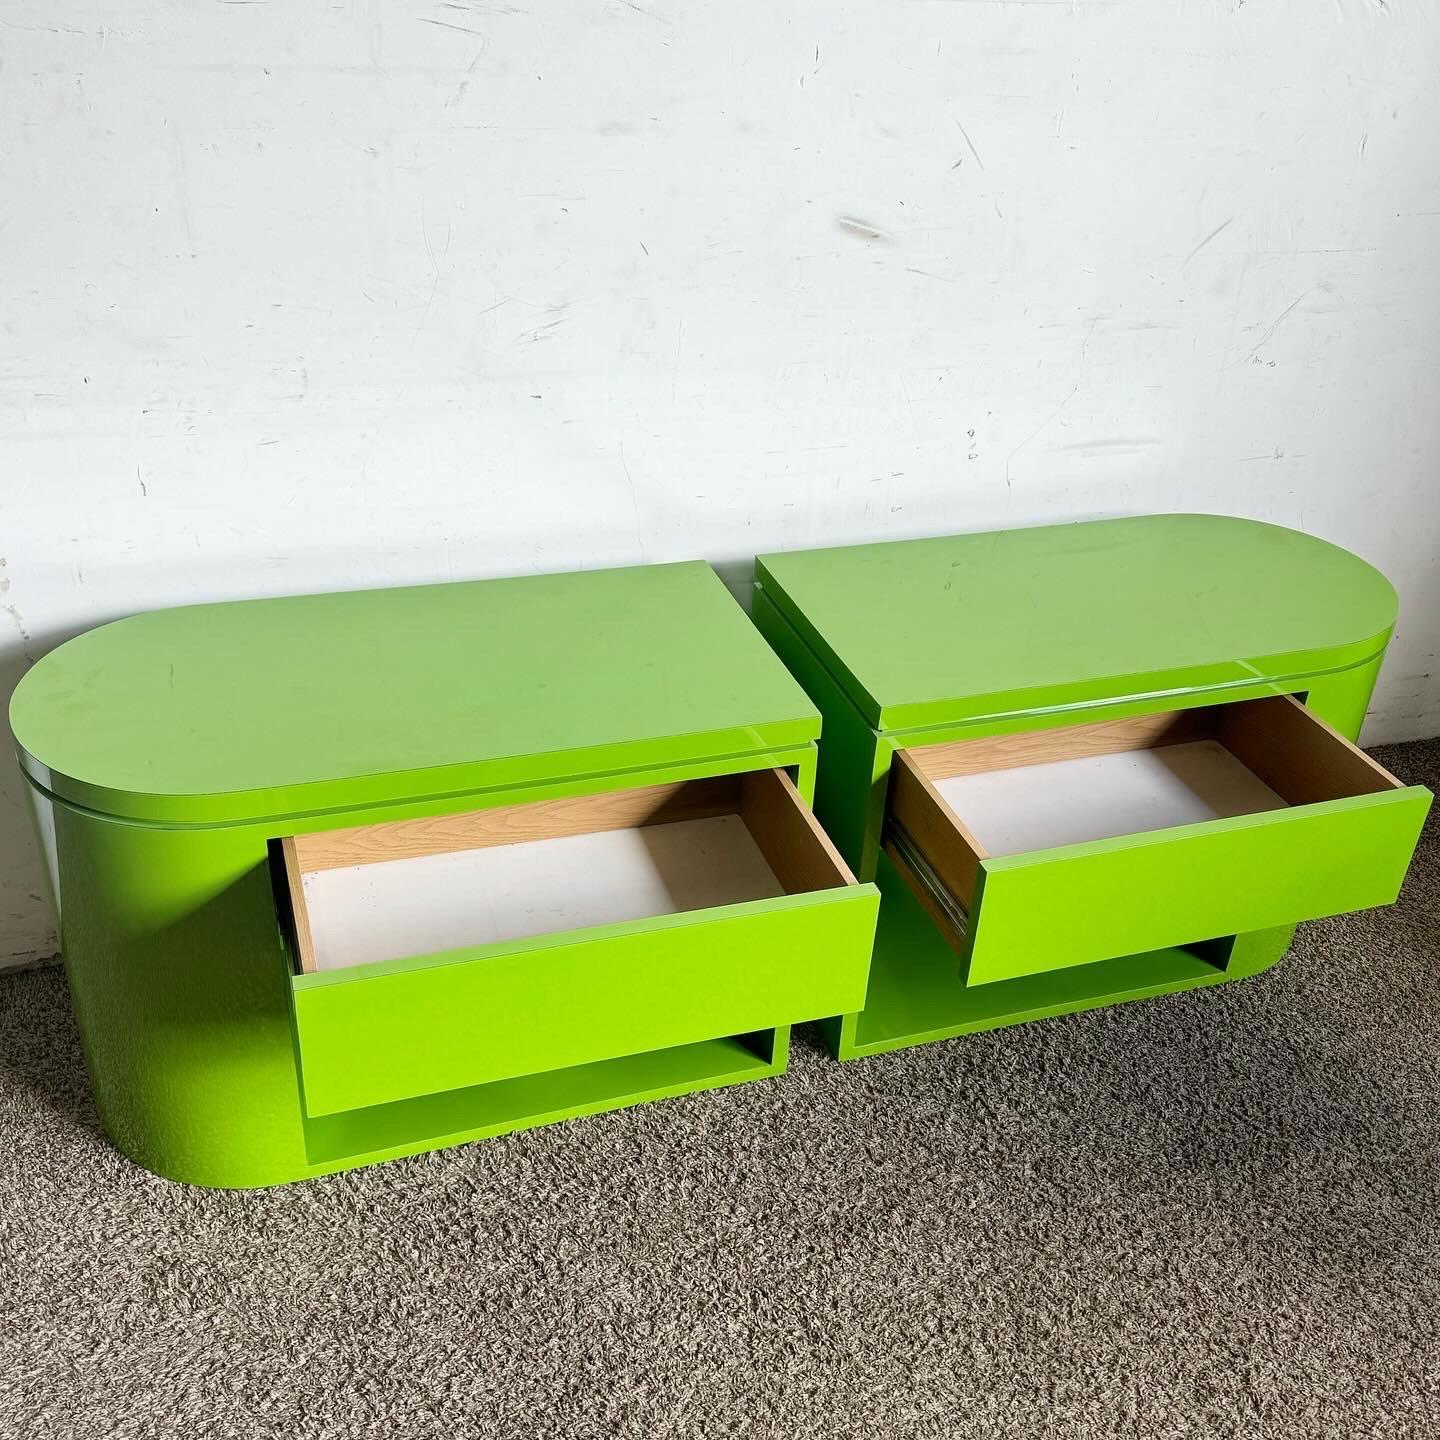 Late 20th Century Postmodern Lime Green Lacquer Laminate End Tables/Nightstands - a Pair For Sale